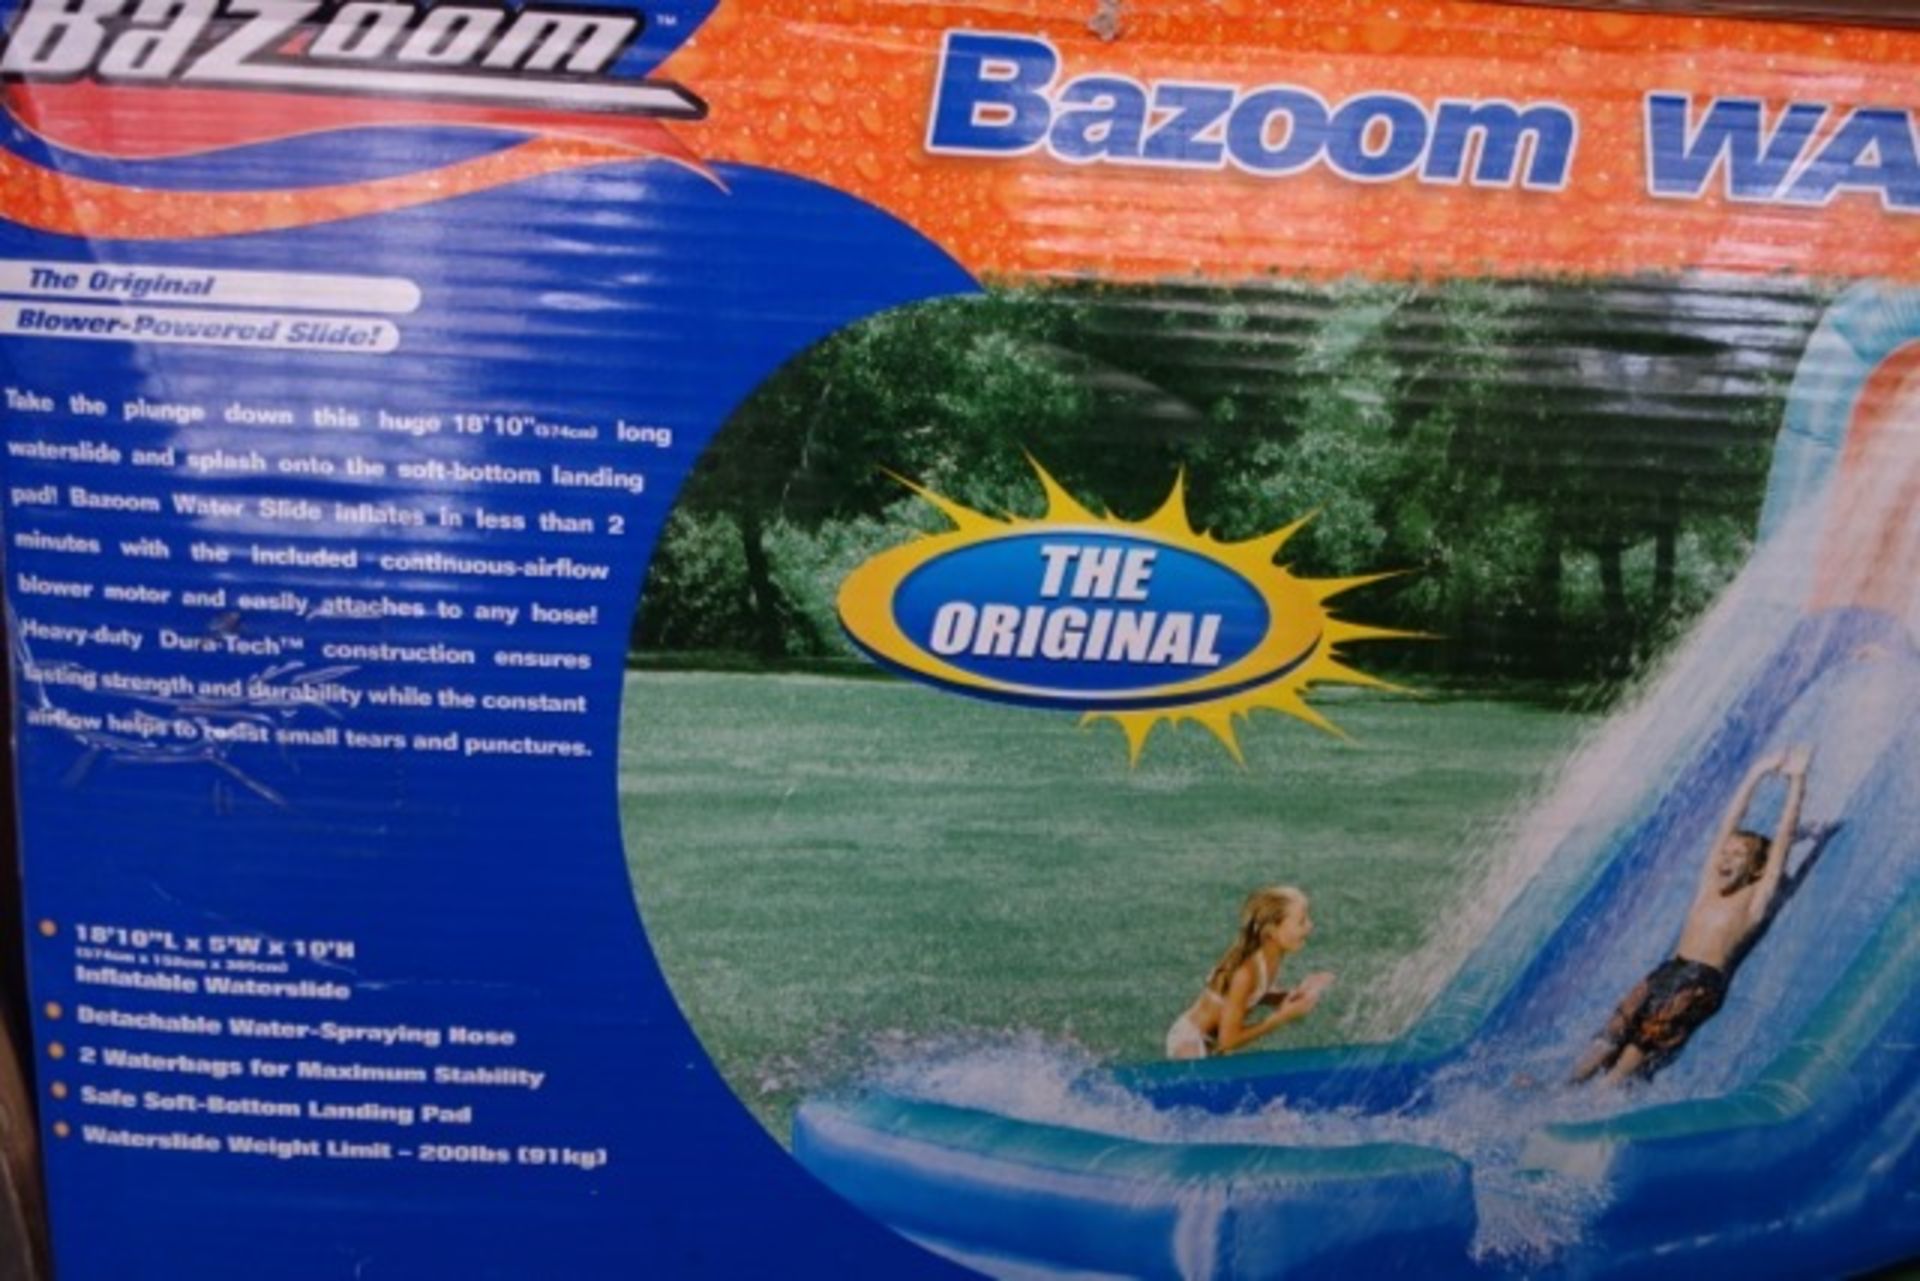 1 x Bazoon Extra Large Water Slide Complete with Pump. RRP £399.99. Huge 18 foot 10 inch long. - Image 3 of 3